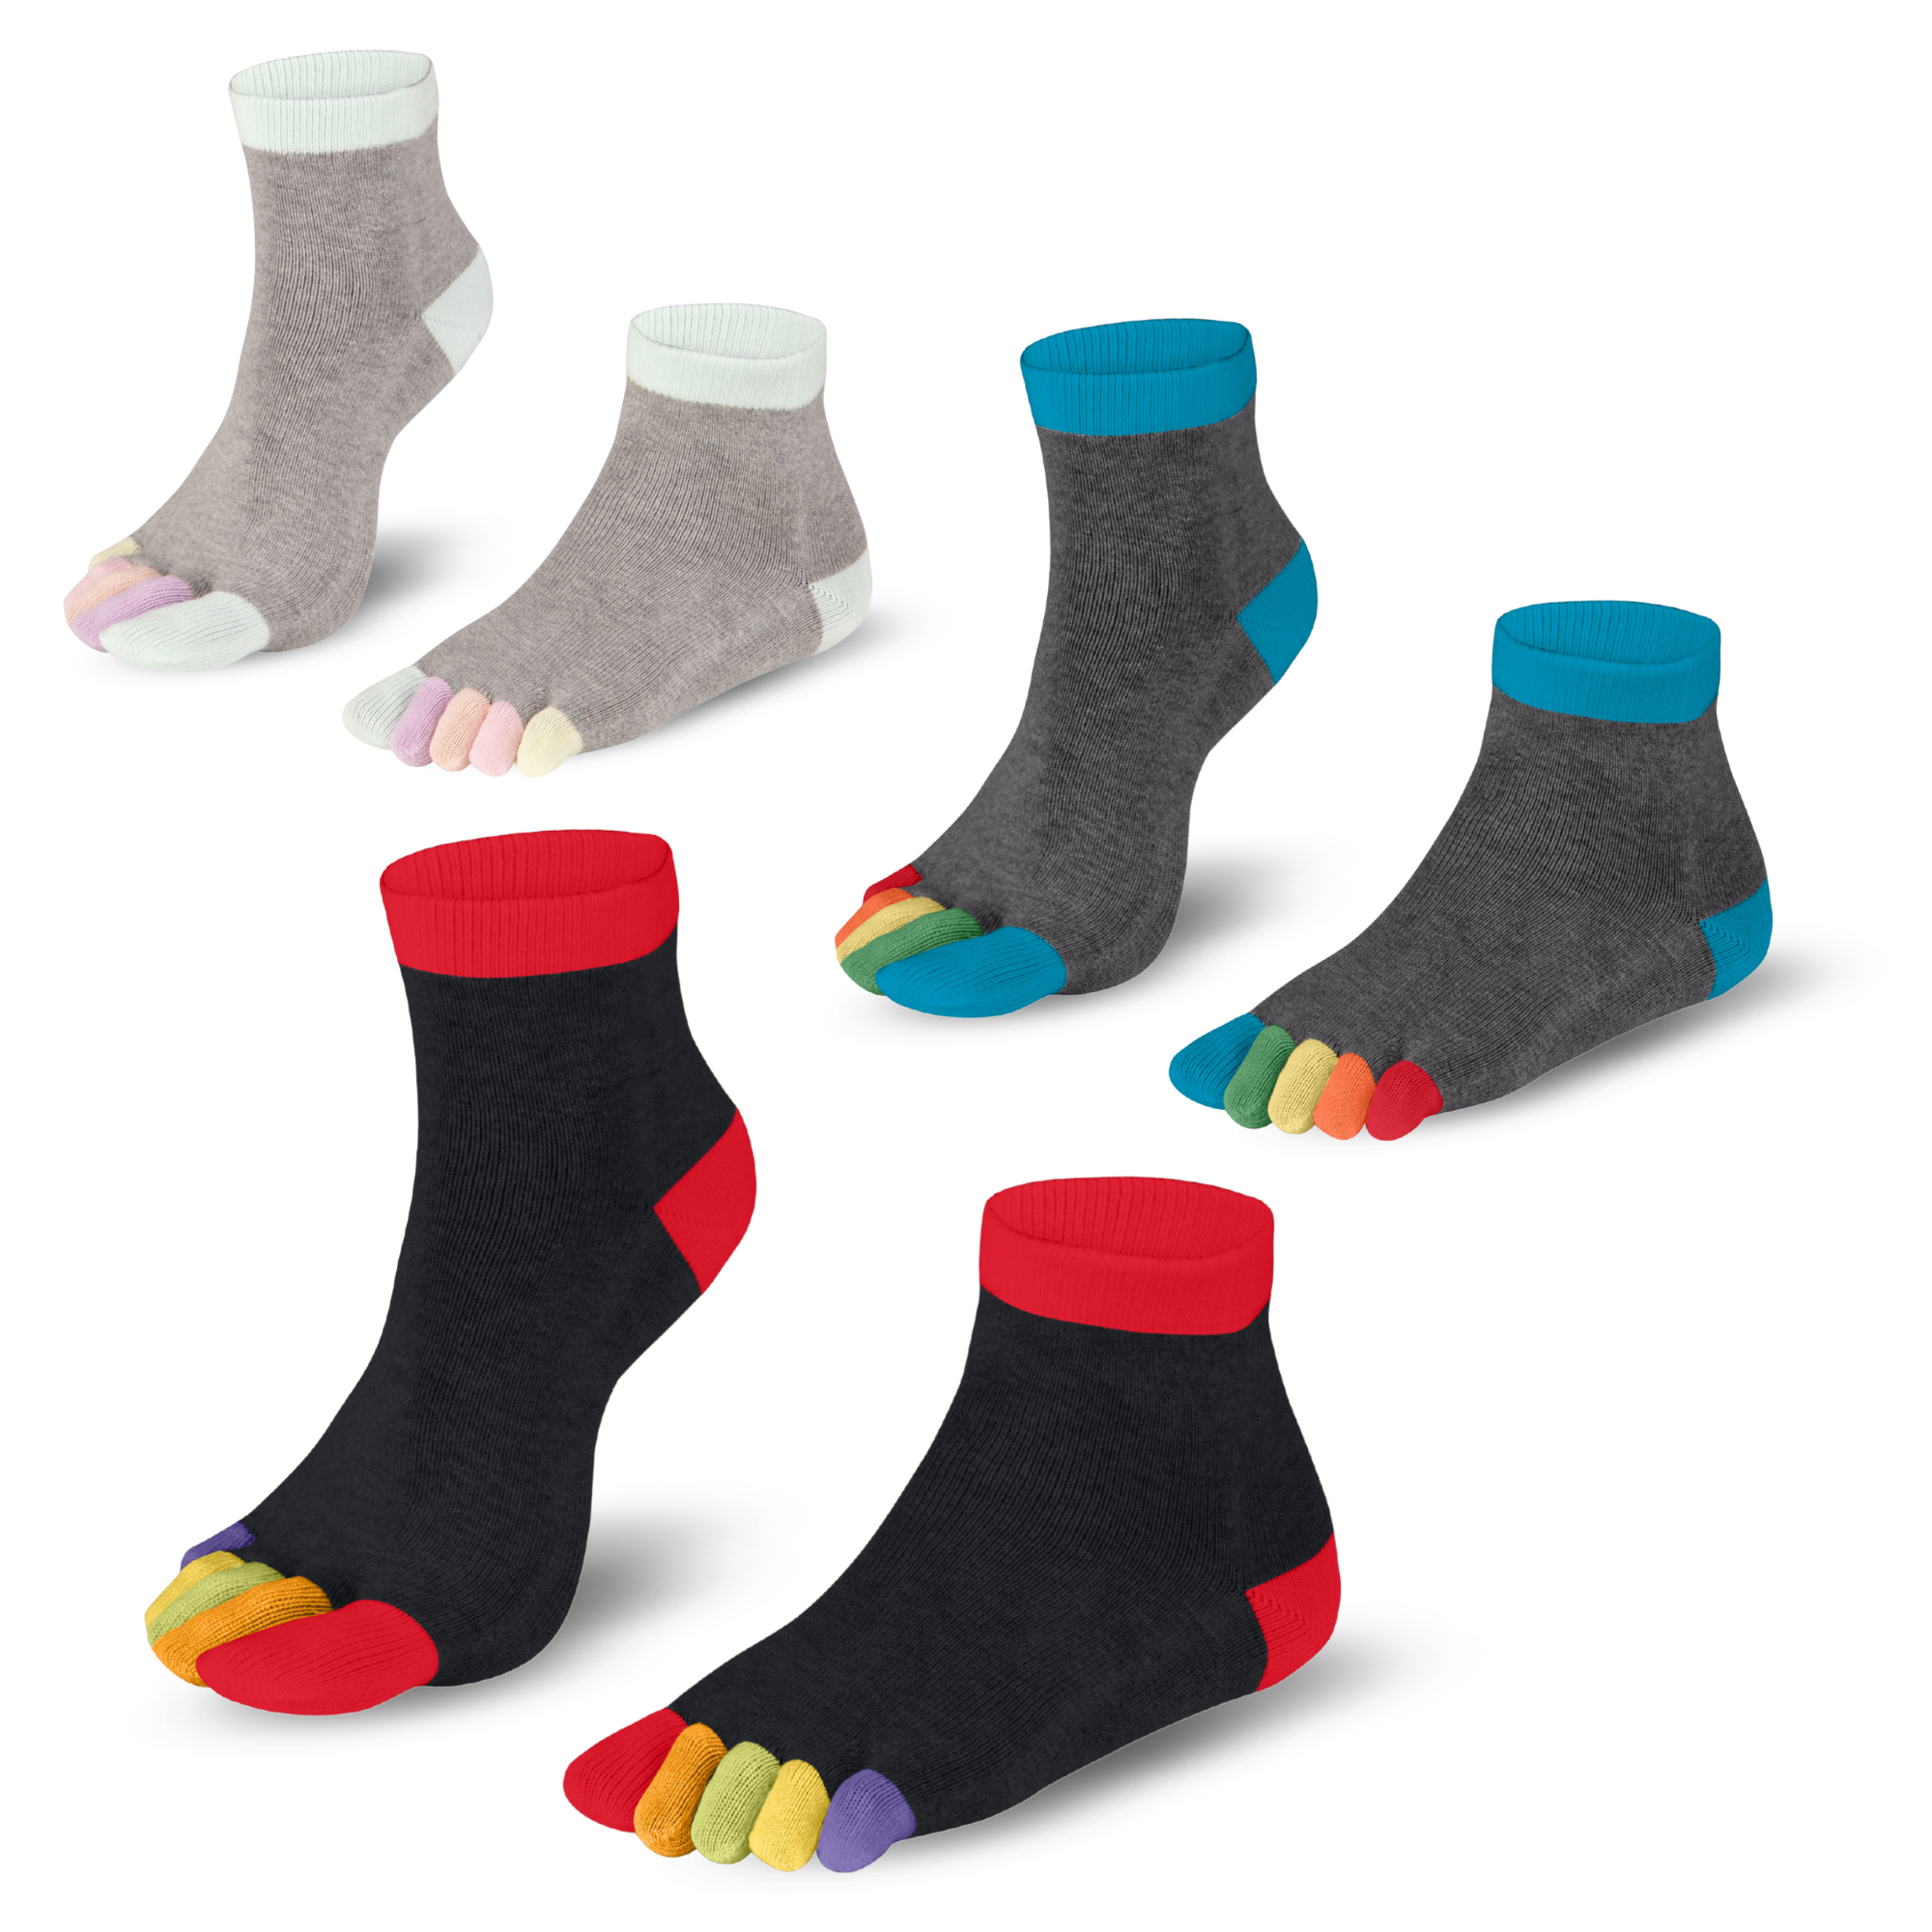 Rainbows short socks, in a remix of 3 - Knitido®